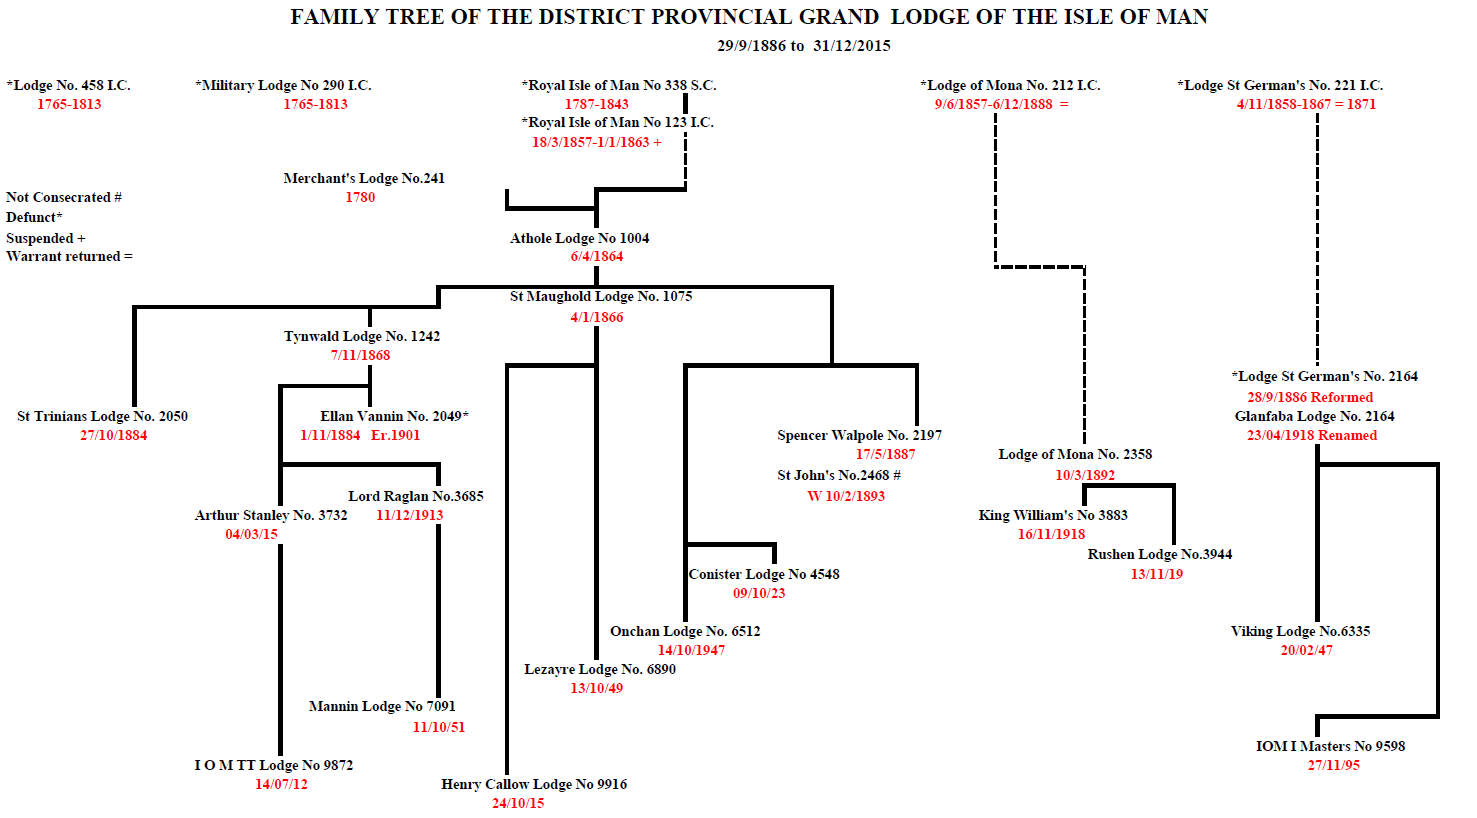 Family Tree of the District Provincial Grand Lodge of the Isle of Man